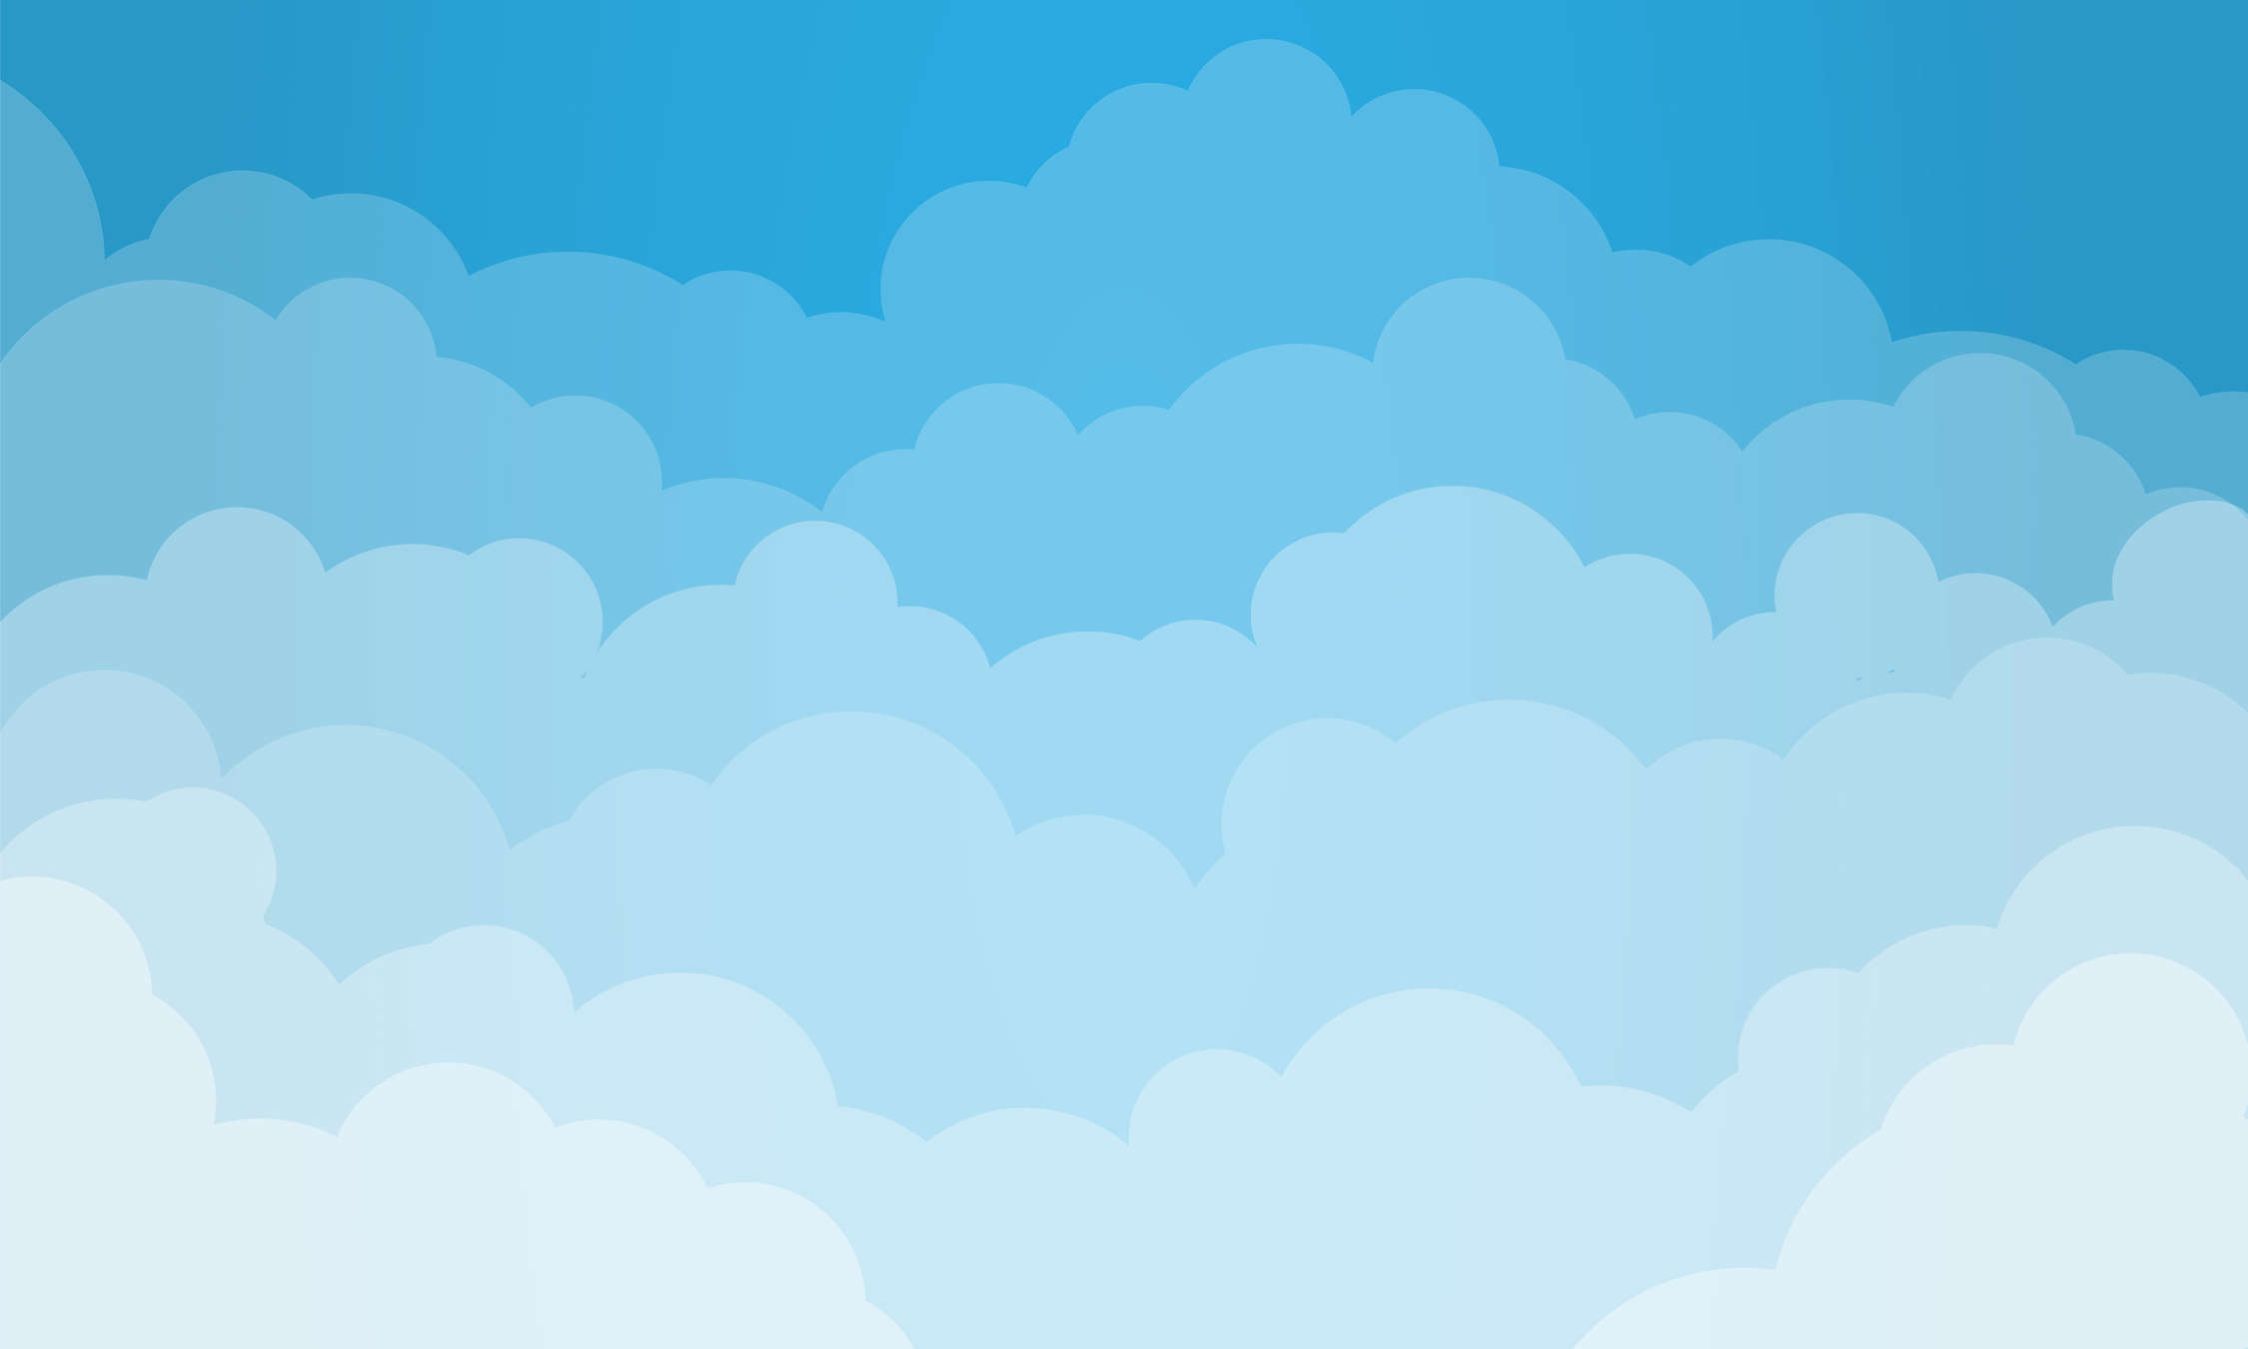             Comic Strip Style Sky with Clouds Wallpaper - Smooth & Pearlescent Non-woven
        